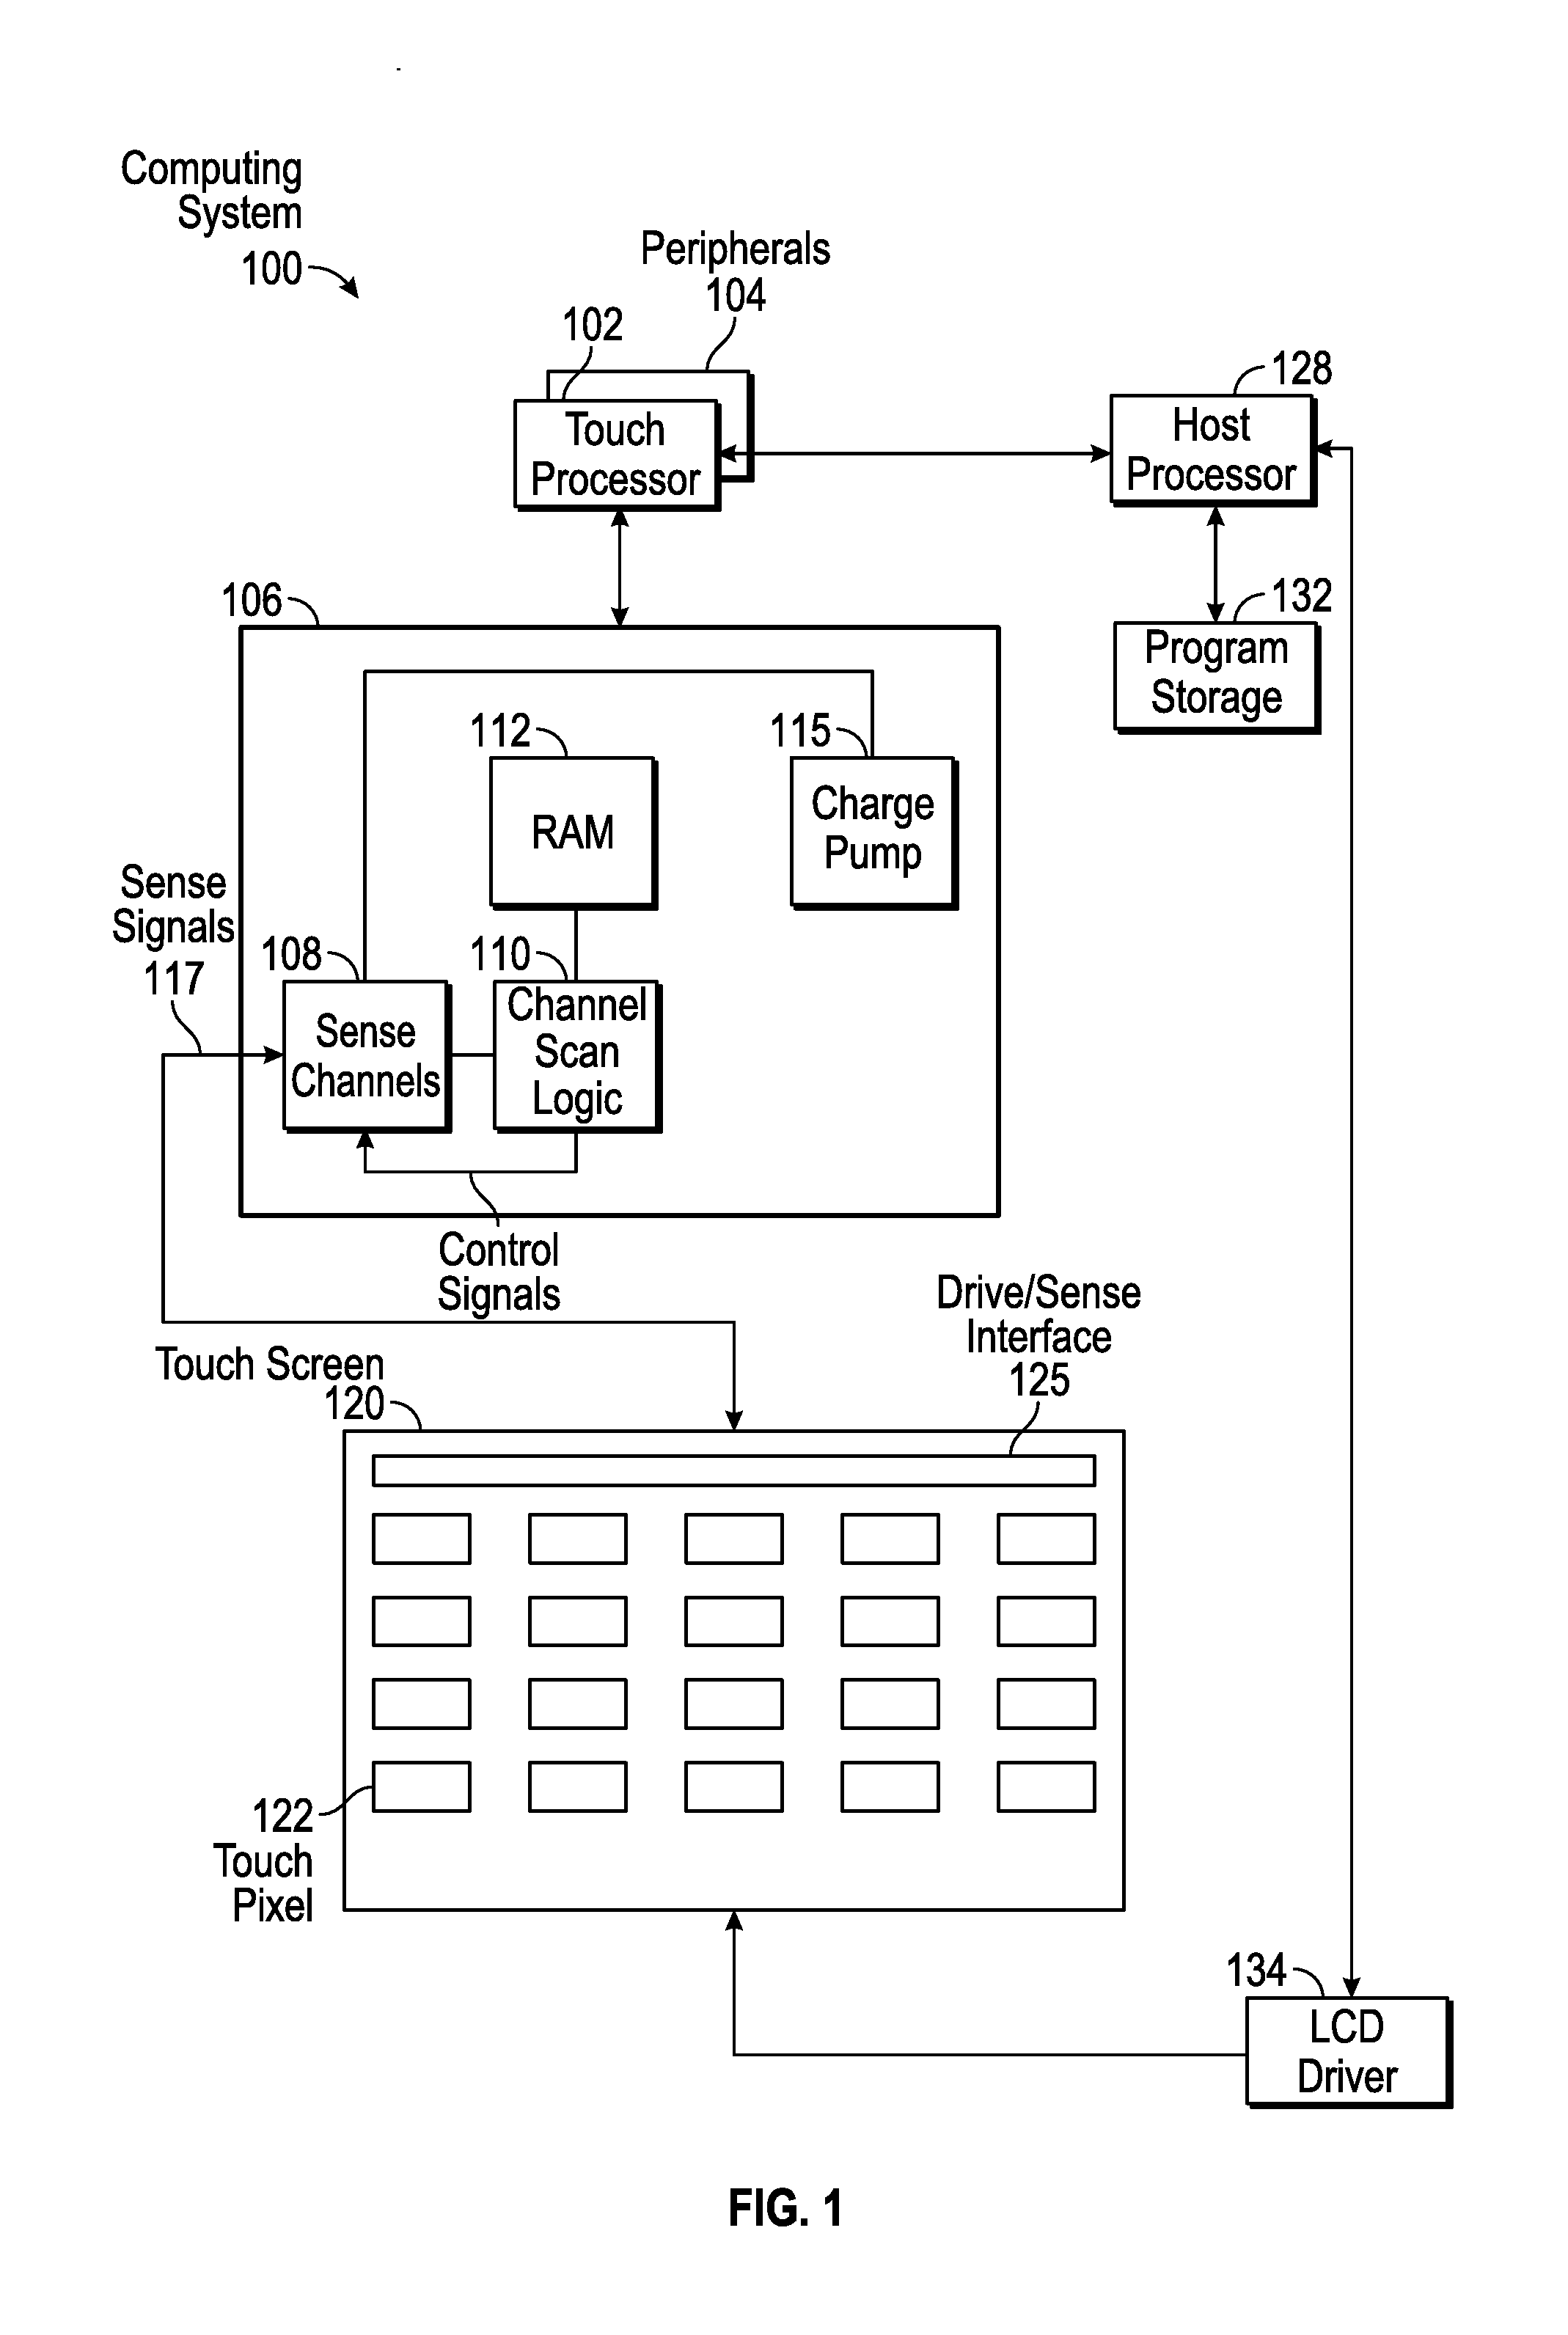 Coded integration of a self-capacitance array